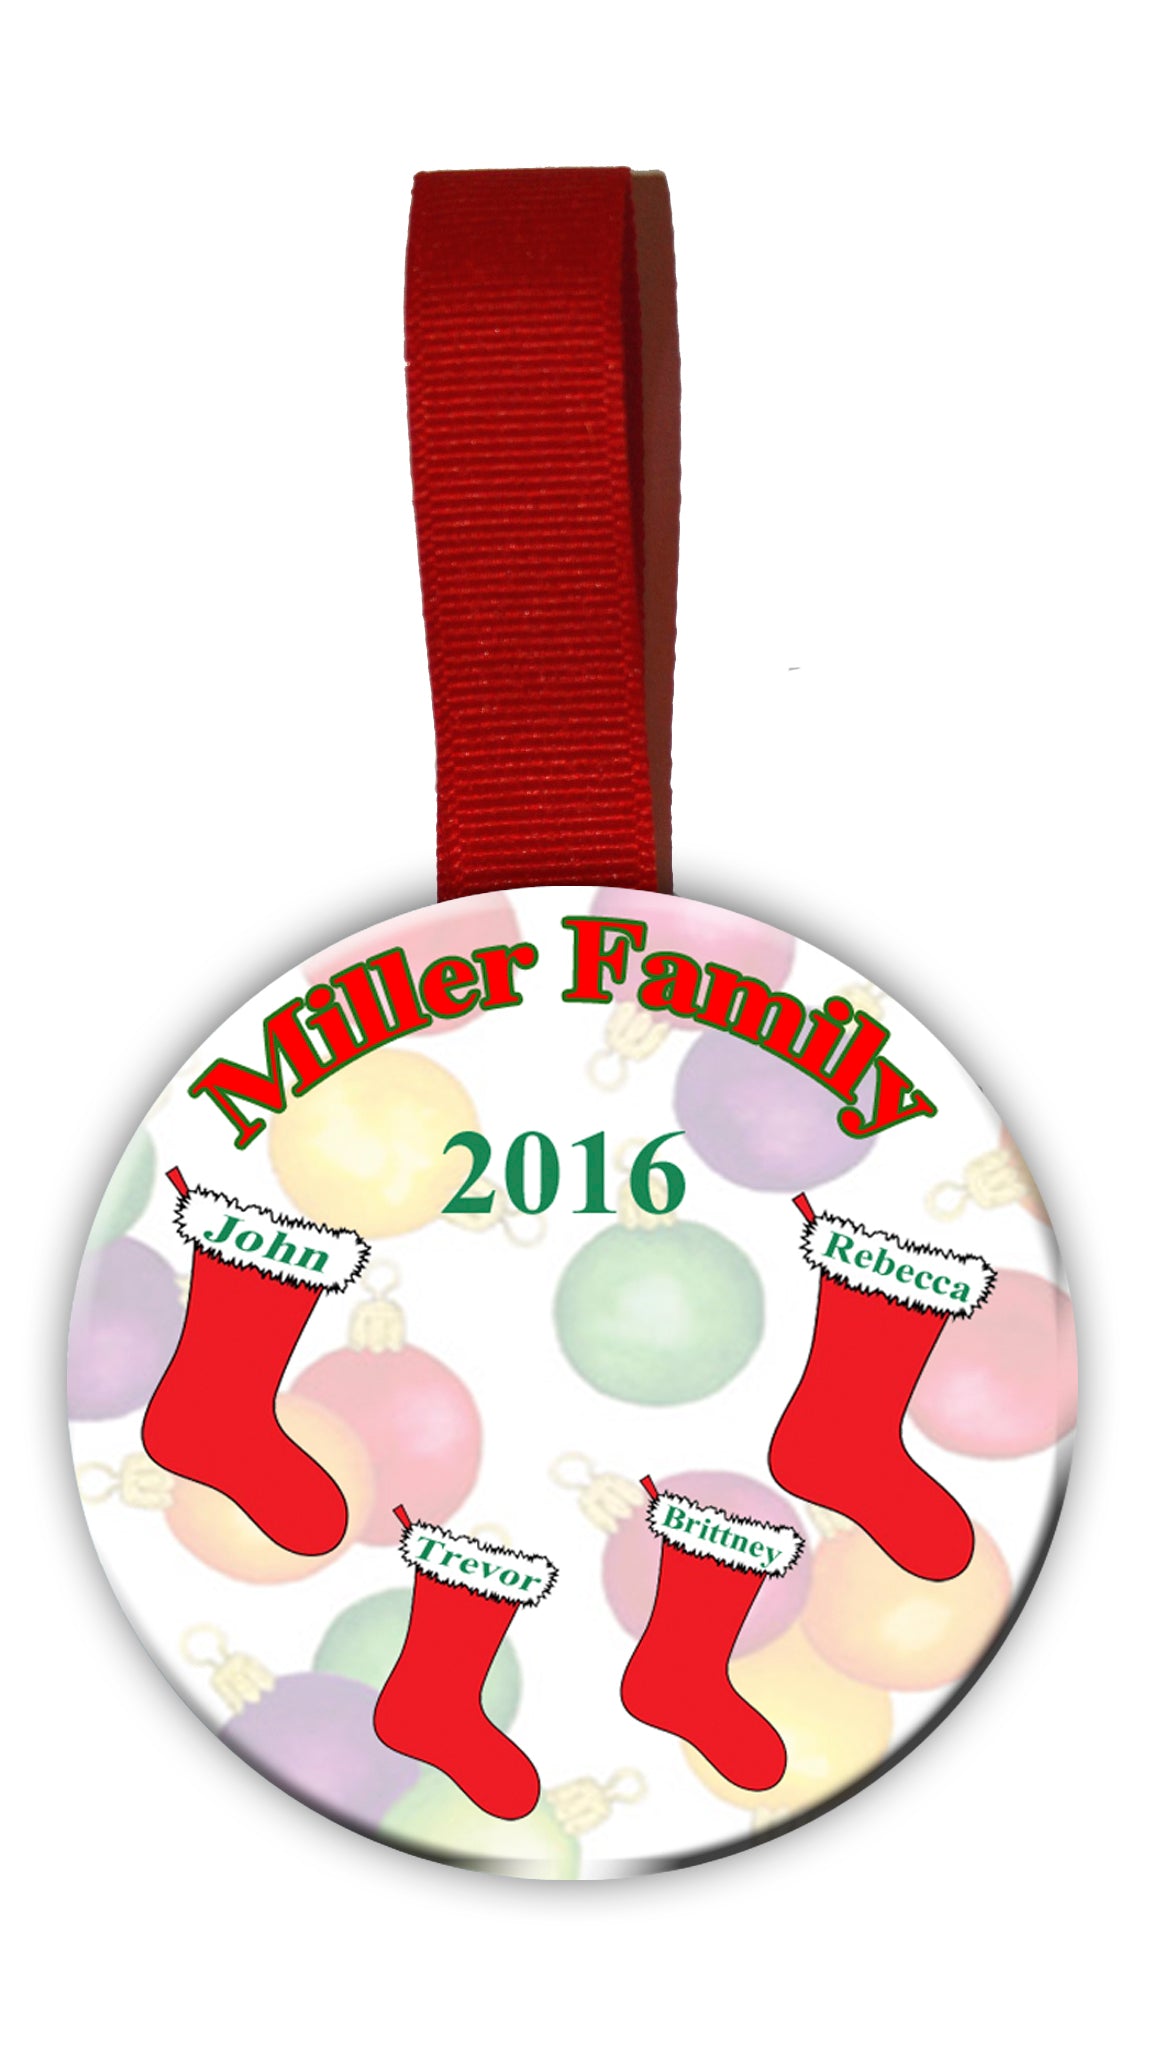 Personalized Christmas Ornament with Family Name and Each Individual Member